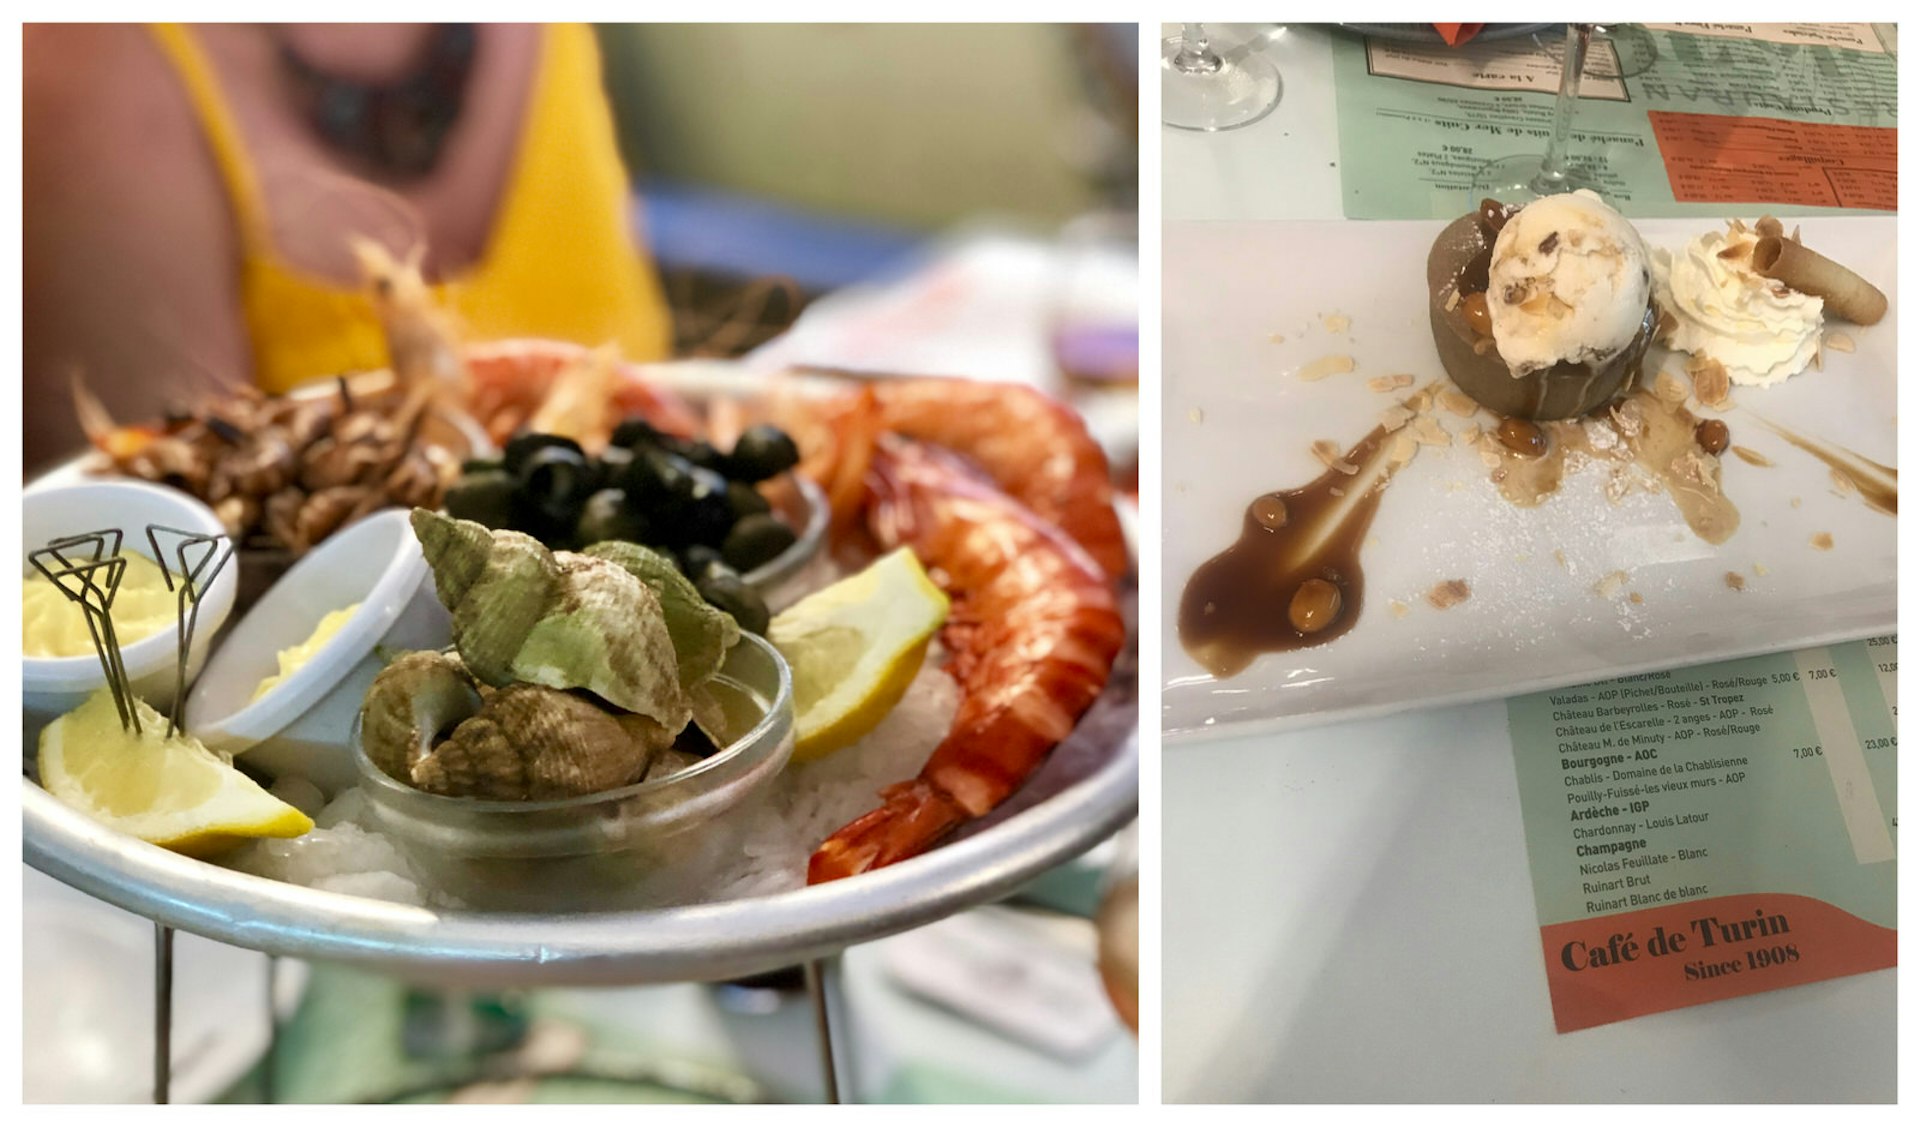 On the left is a close up of a seafood platter with prawns and sea snails, on the right a grey hazelnut dessert with ice cream on top and cream on the side.